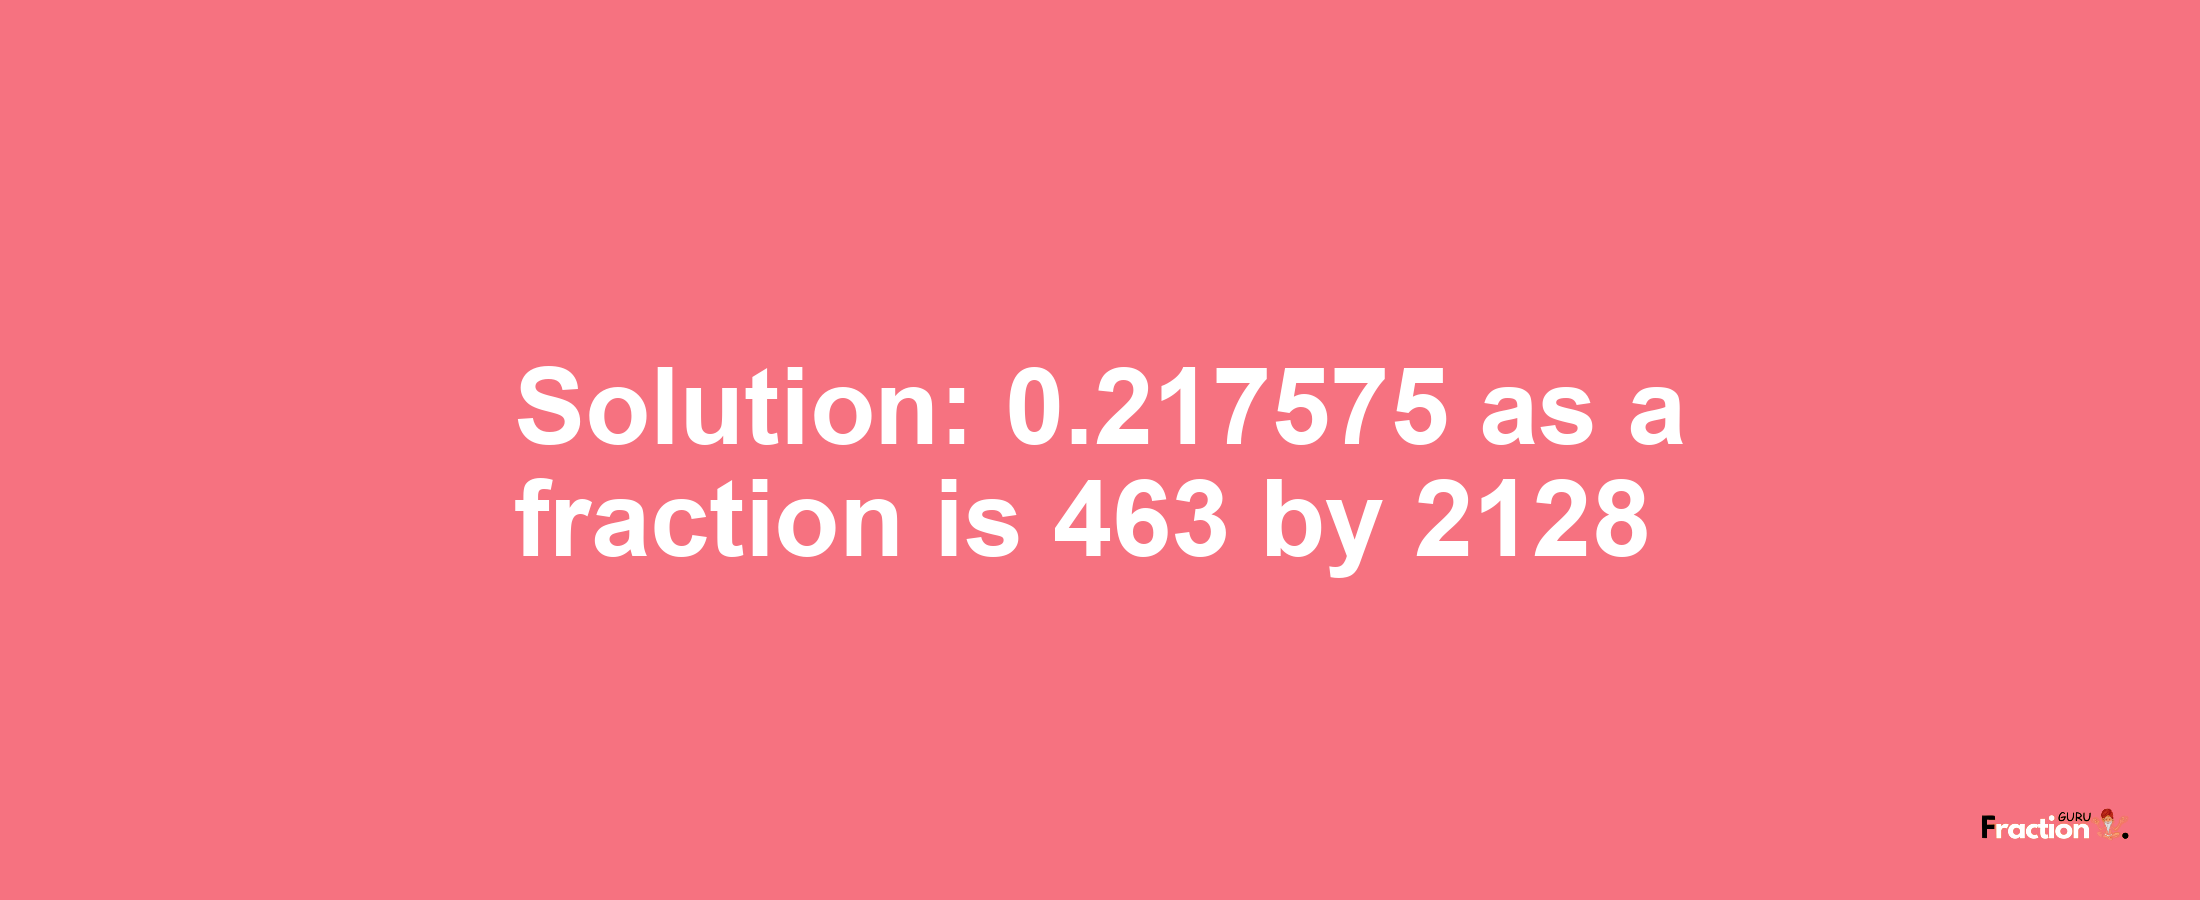 Solution:0.217575 as a fraction is 463/2128